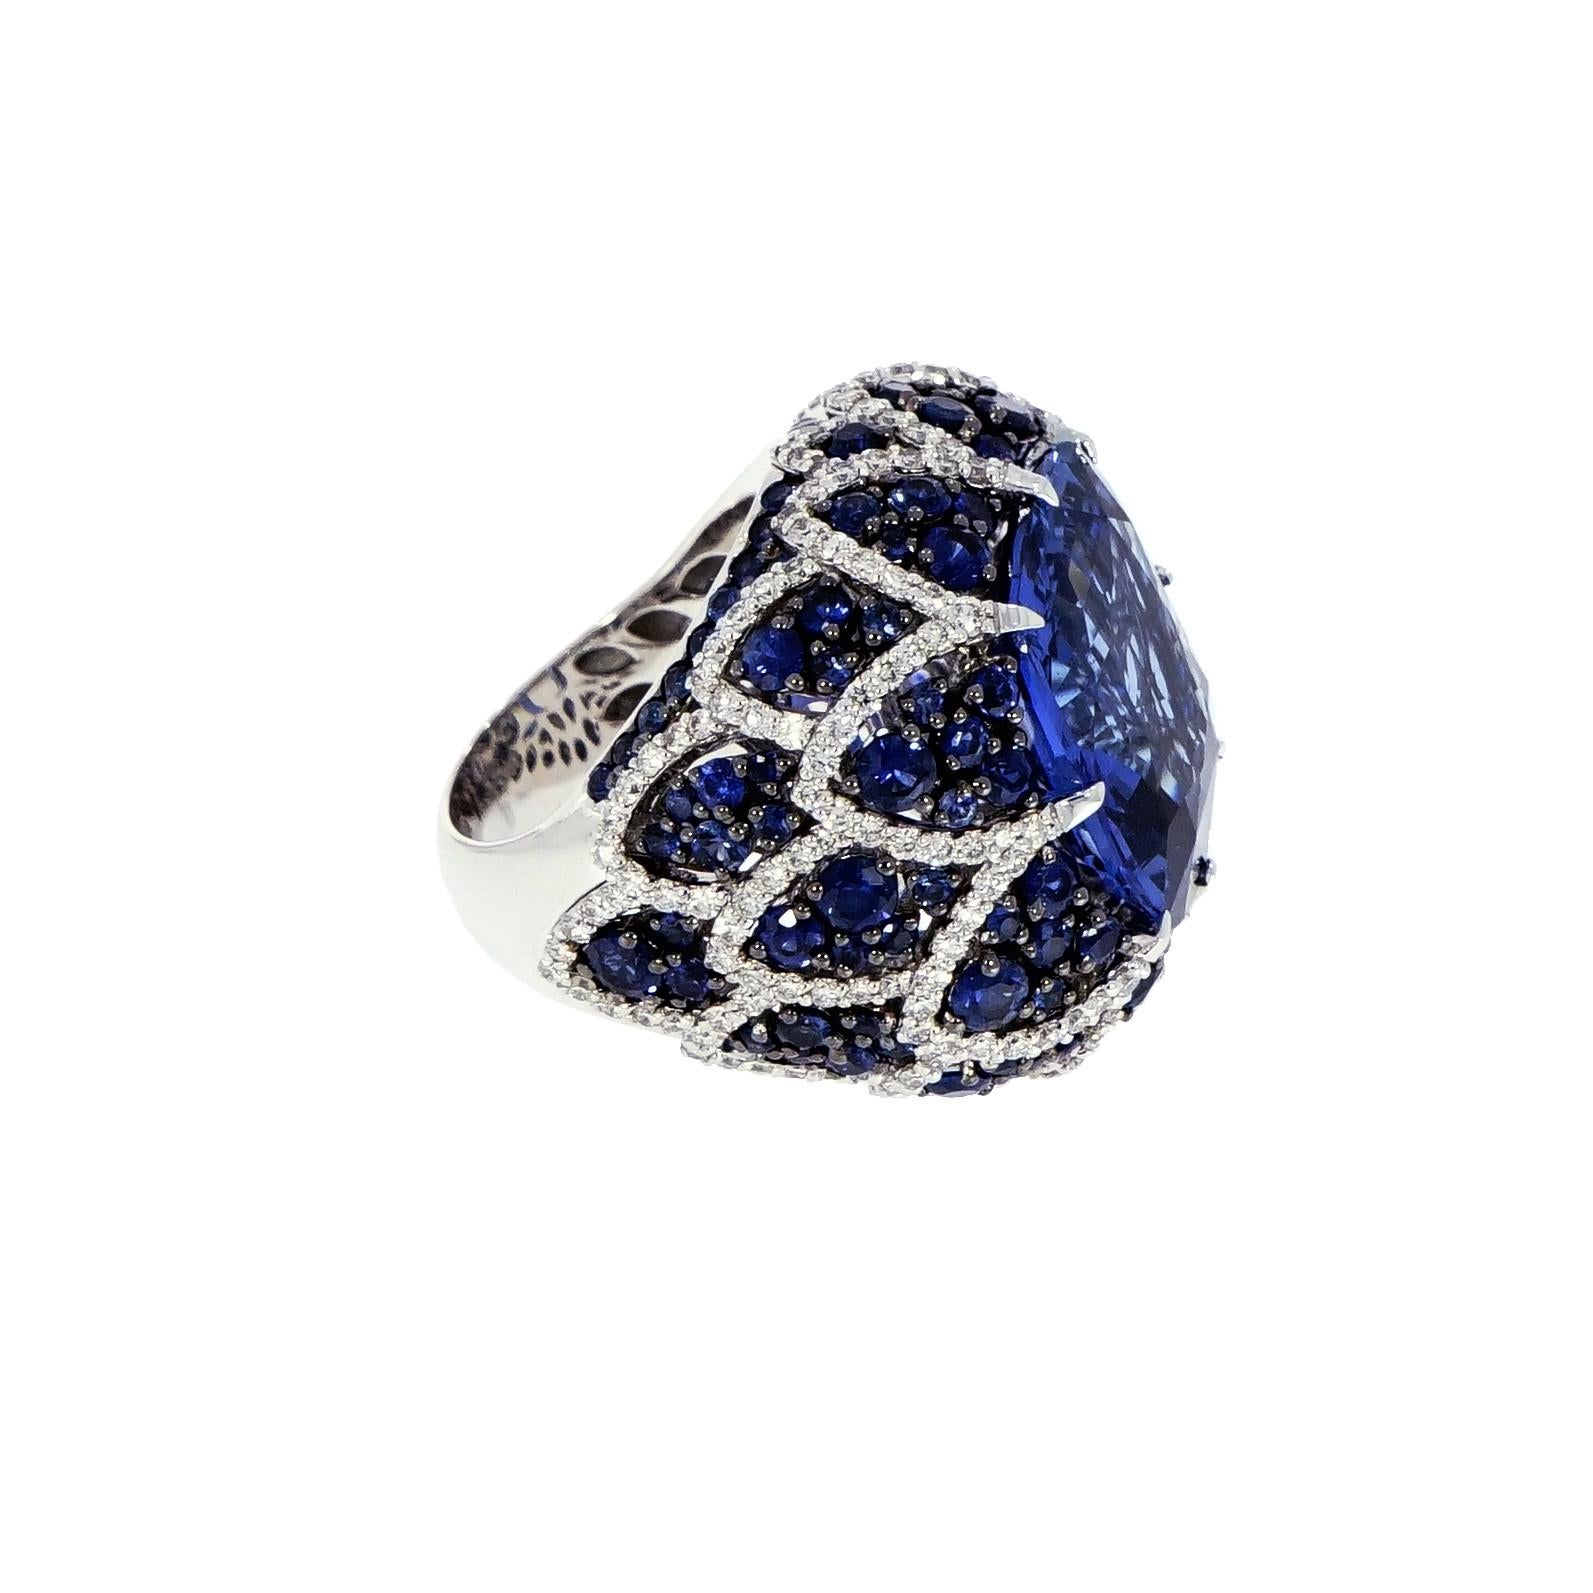 Inspired by the history and beauty of the Mediterranean with a modern twist of fashion forward jewelry.
This gorgeous Sapphire and Diamond cocktail Ring is handcrafted in 18K White Gold. 
Centering the ring is a gorgeous Certified 18.23 carat Blue